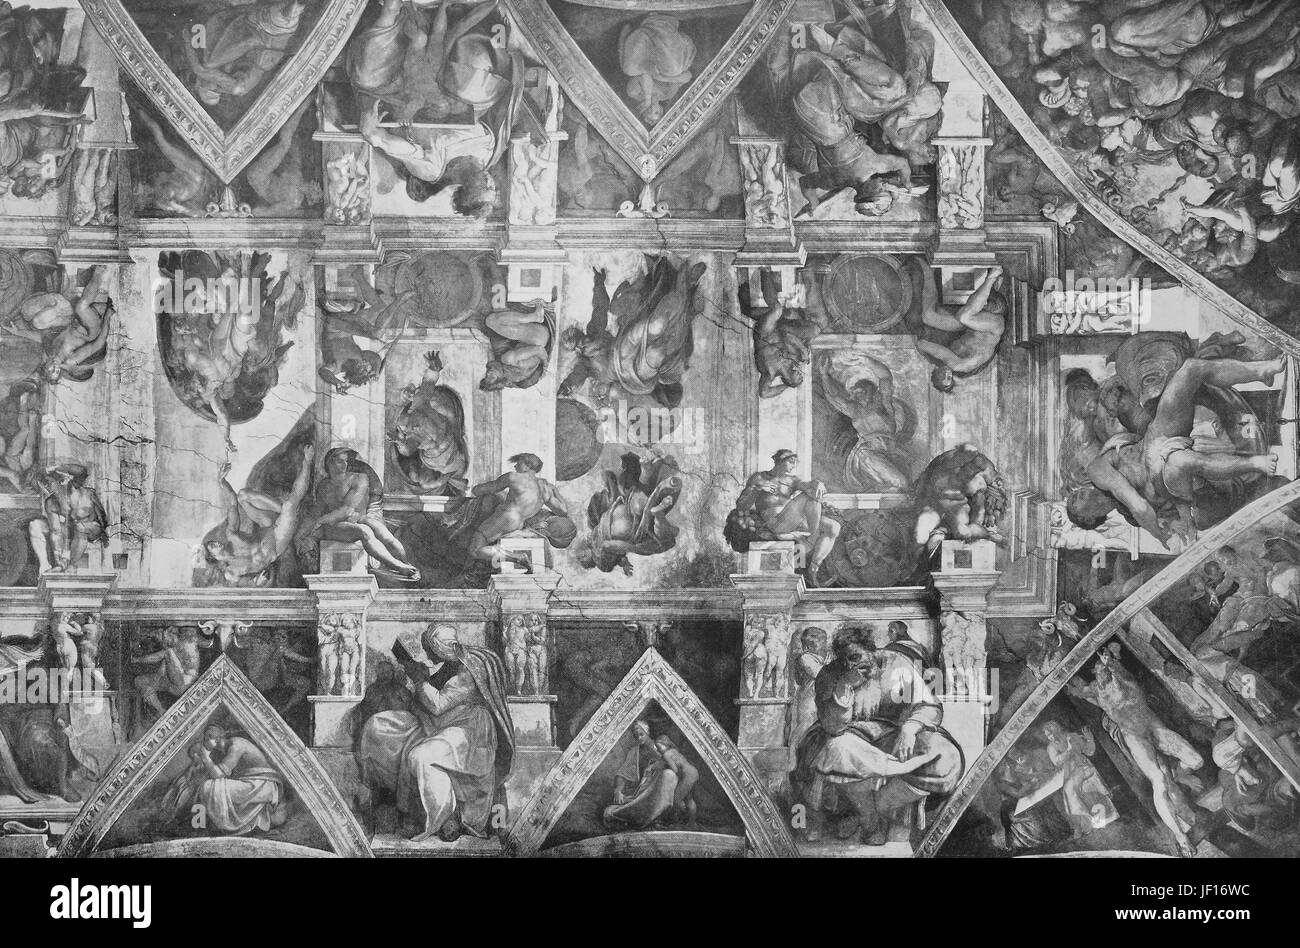 Historical Image Of A Section Of The Sistine Chapel Ceiling